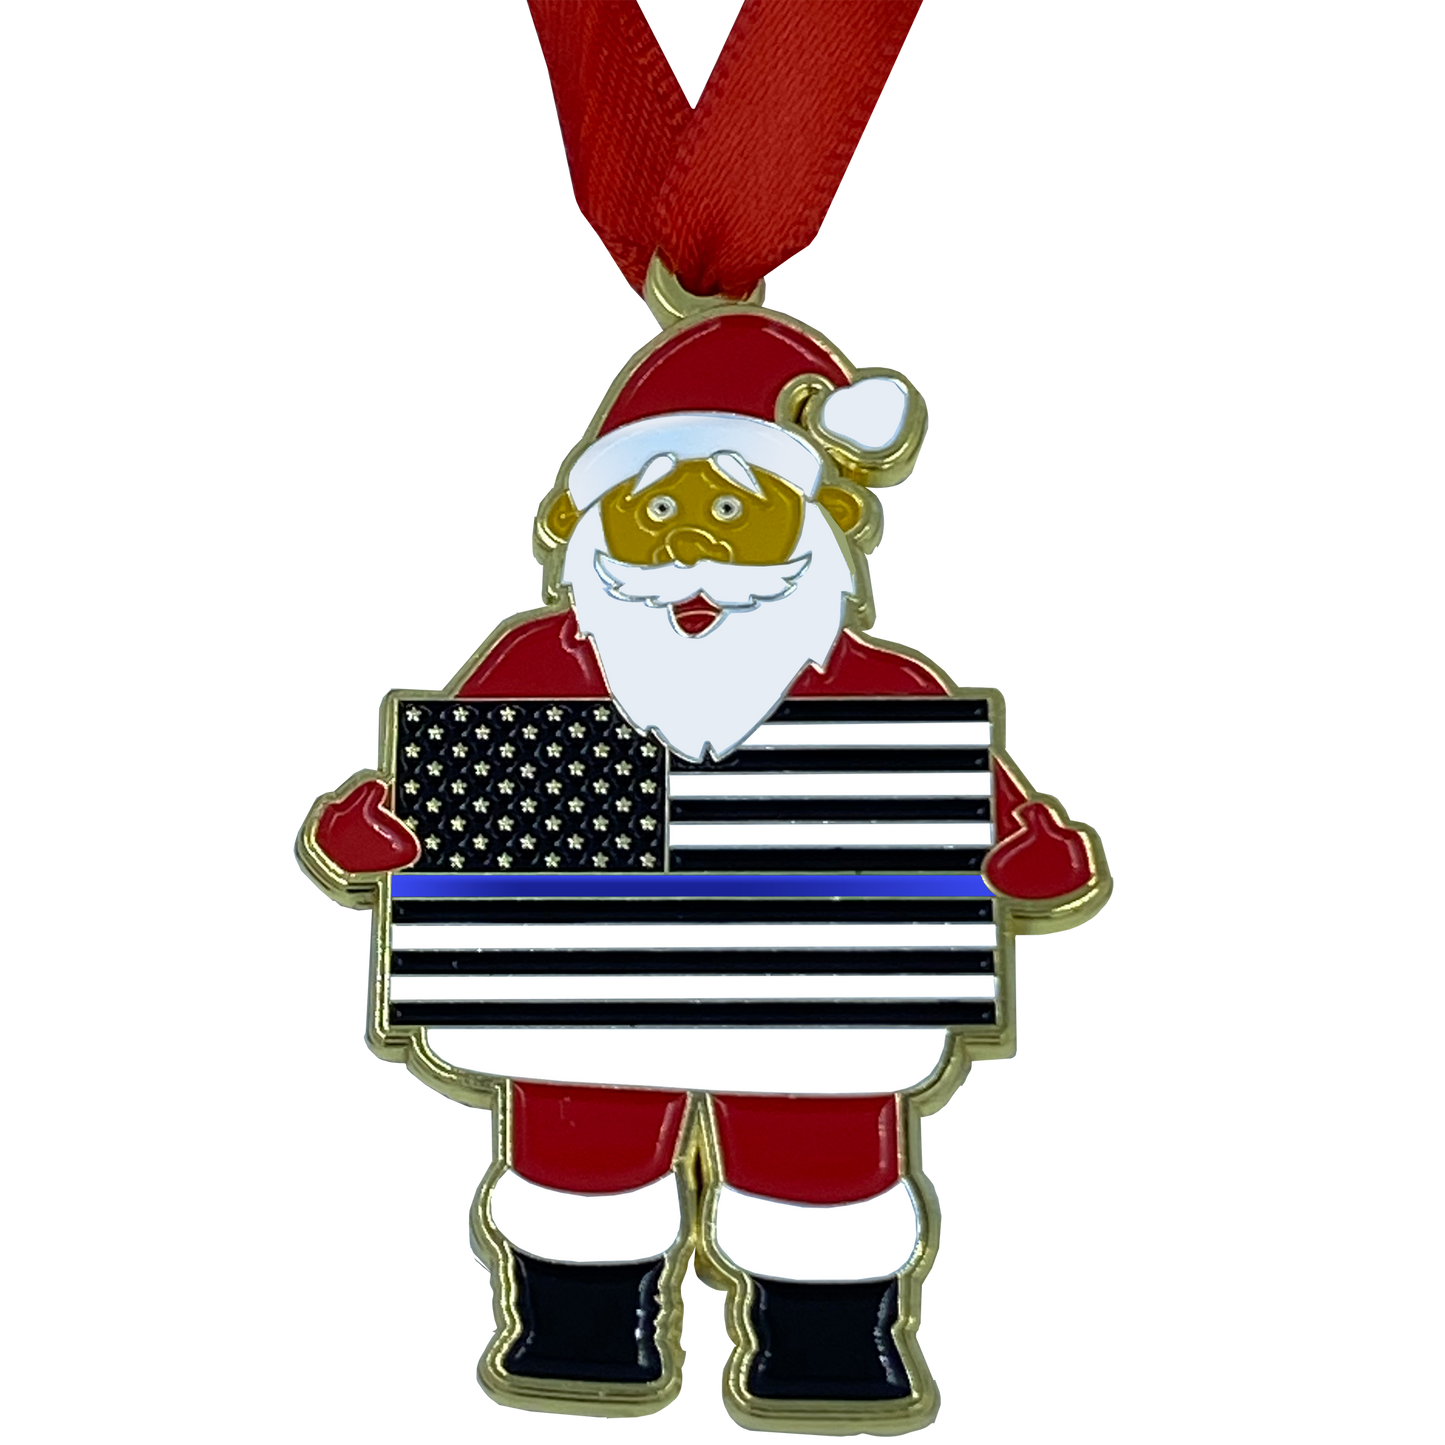 BL1-12A Thin Blue Line Christmas Ornament Santa Police Challenge Coin LAPD NYPD CBP FBI FAM ATF USSS